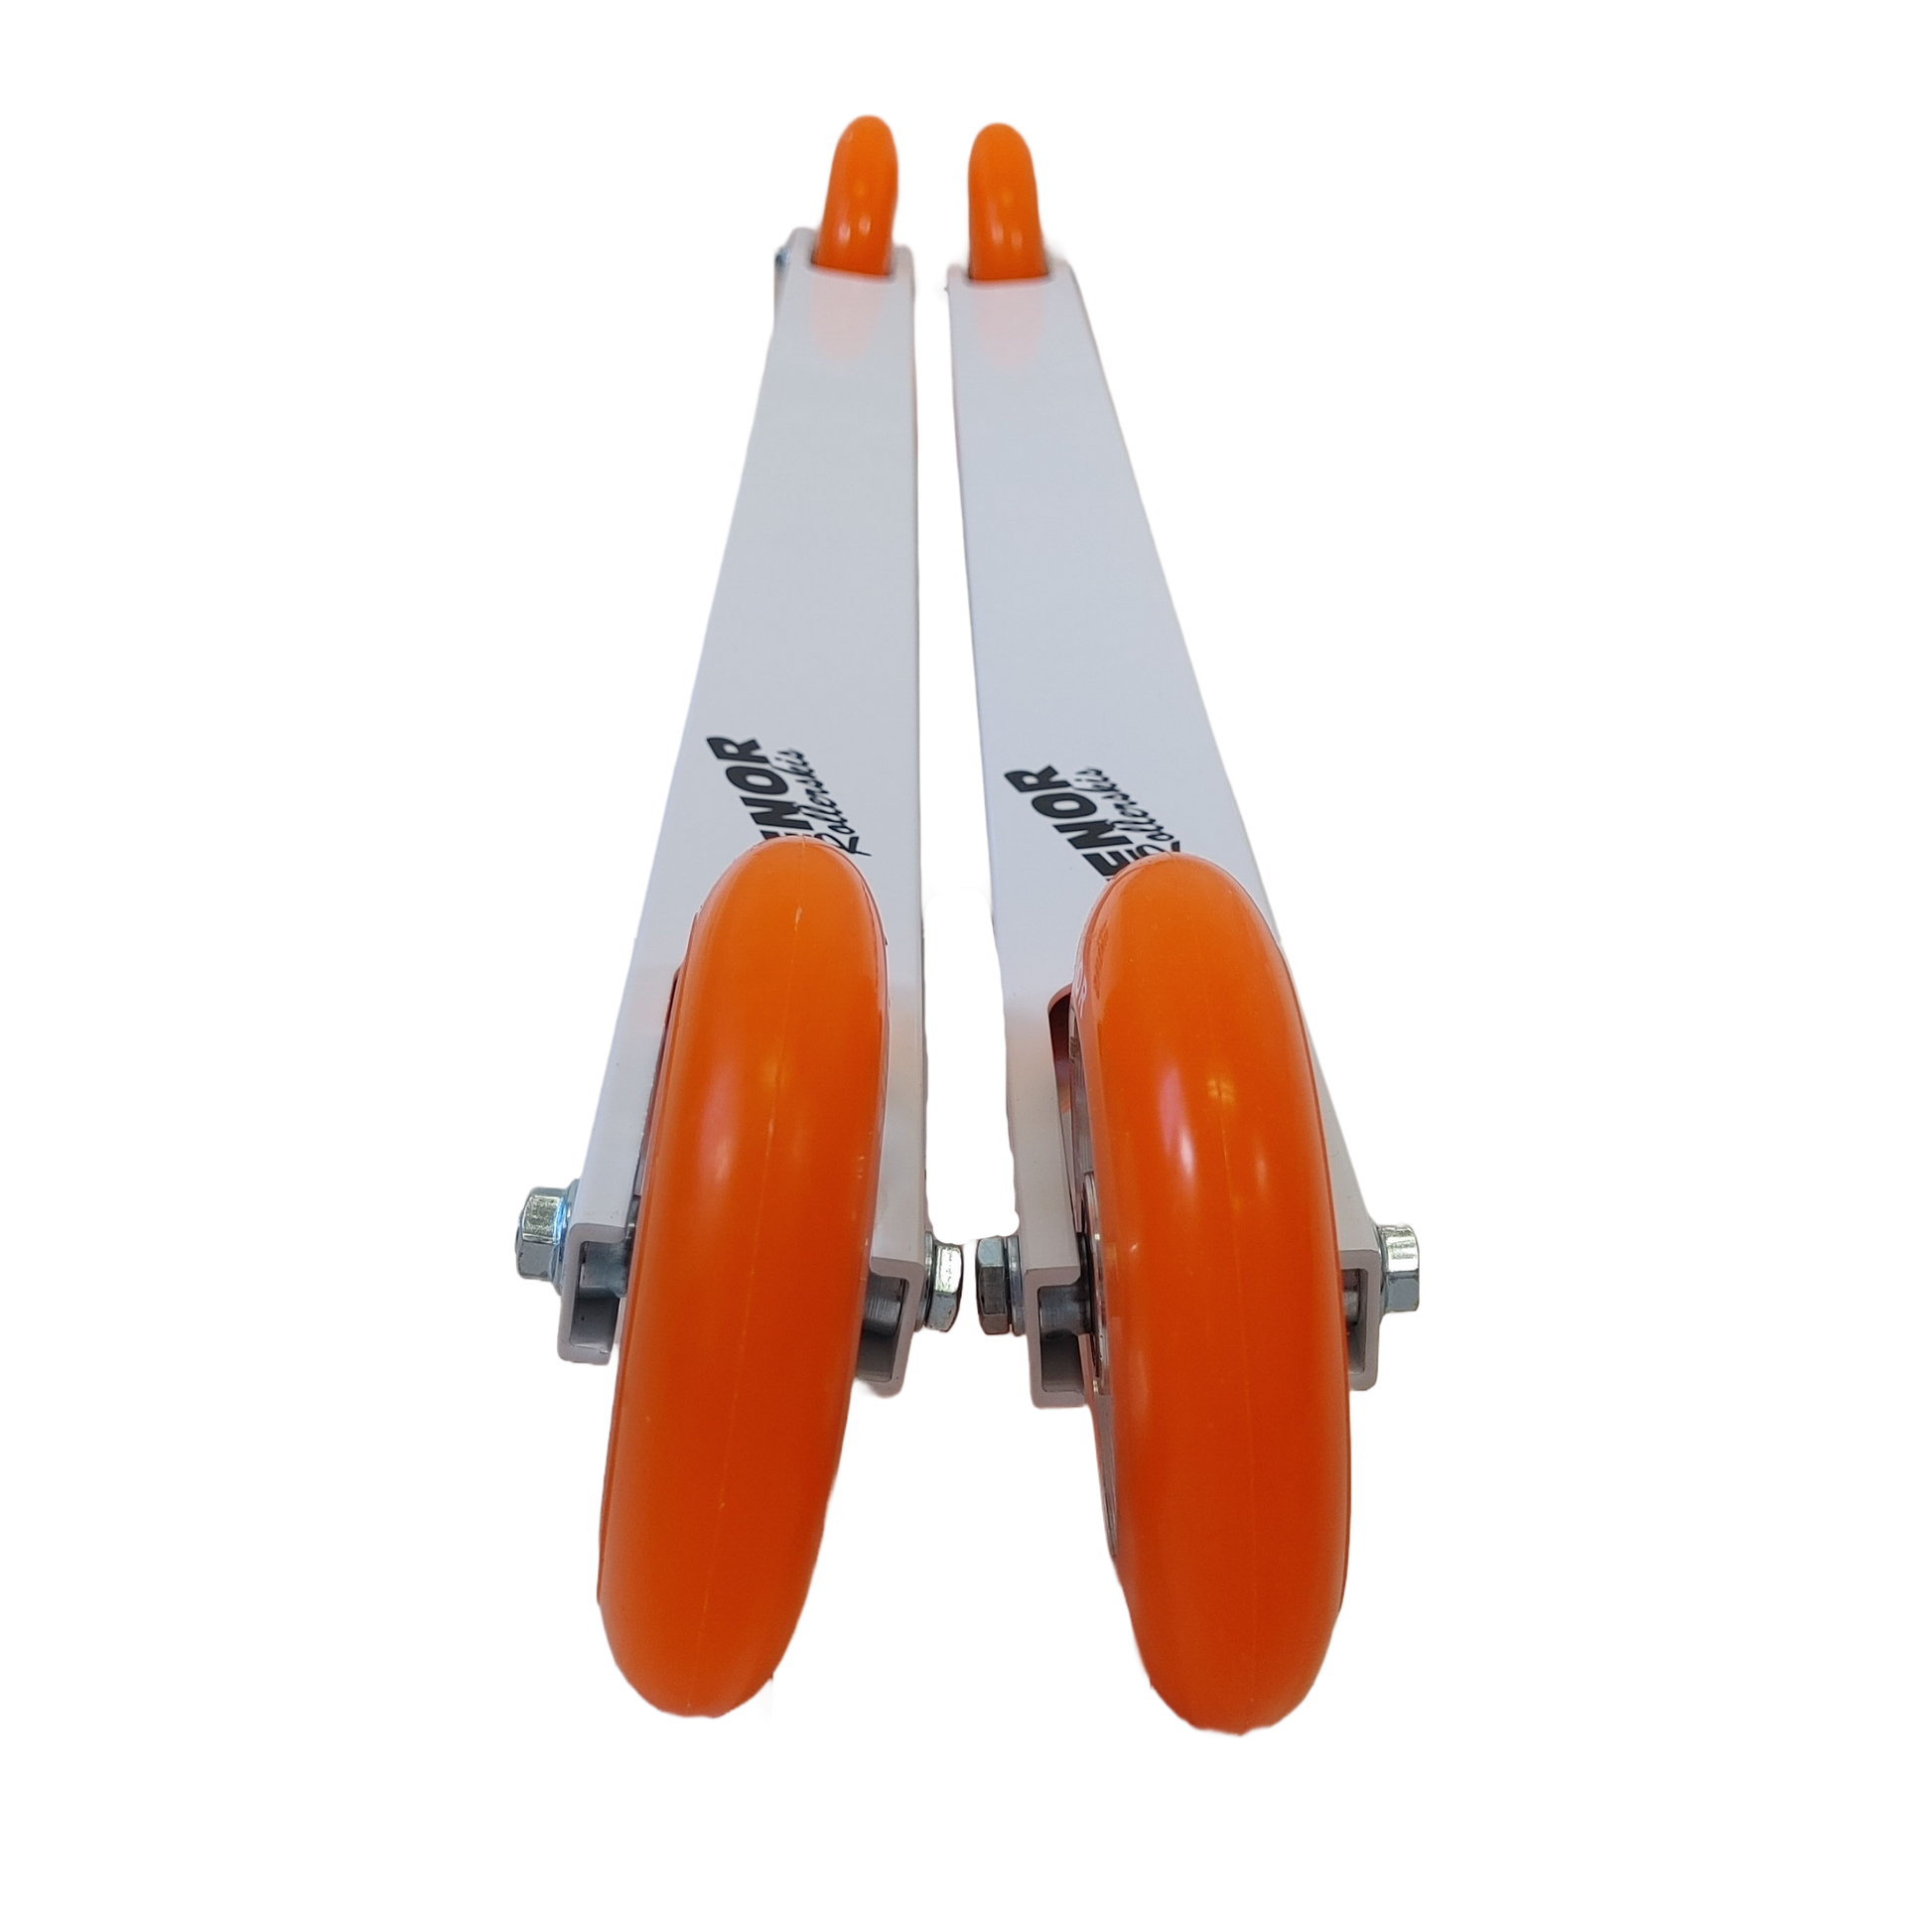 A product picture of the Swenor Skate Equipe R2 Ceramic Racing Rollerskis